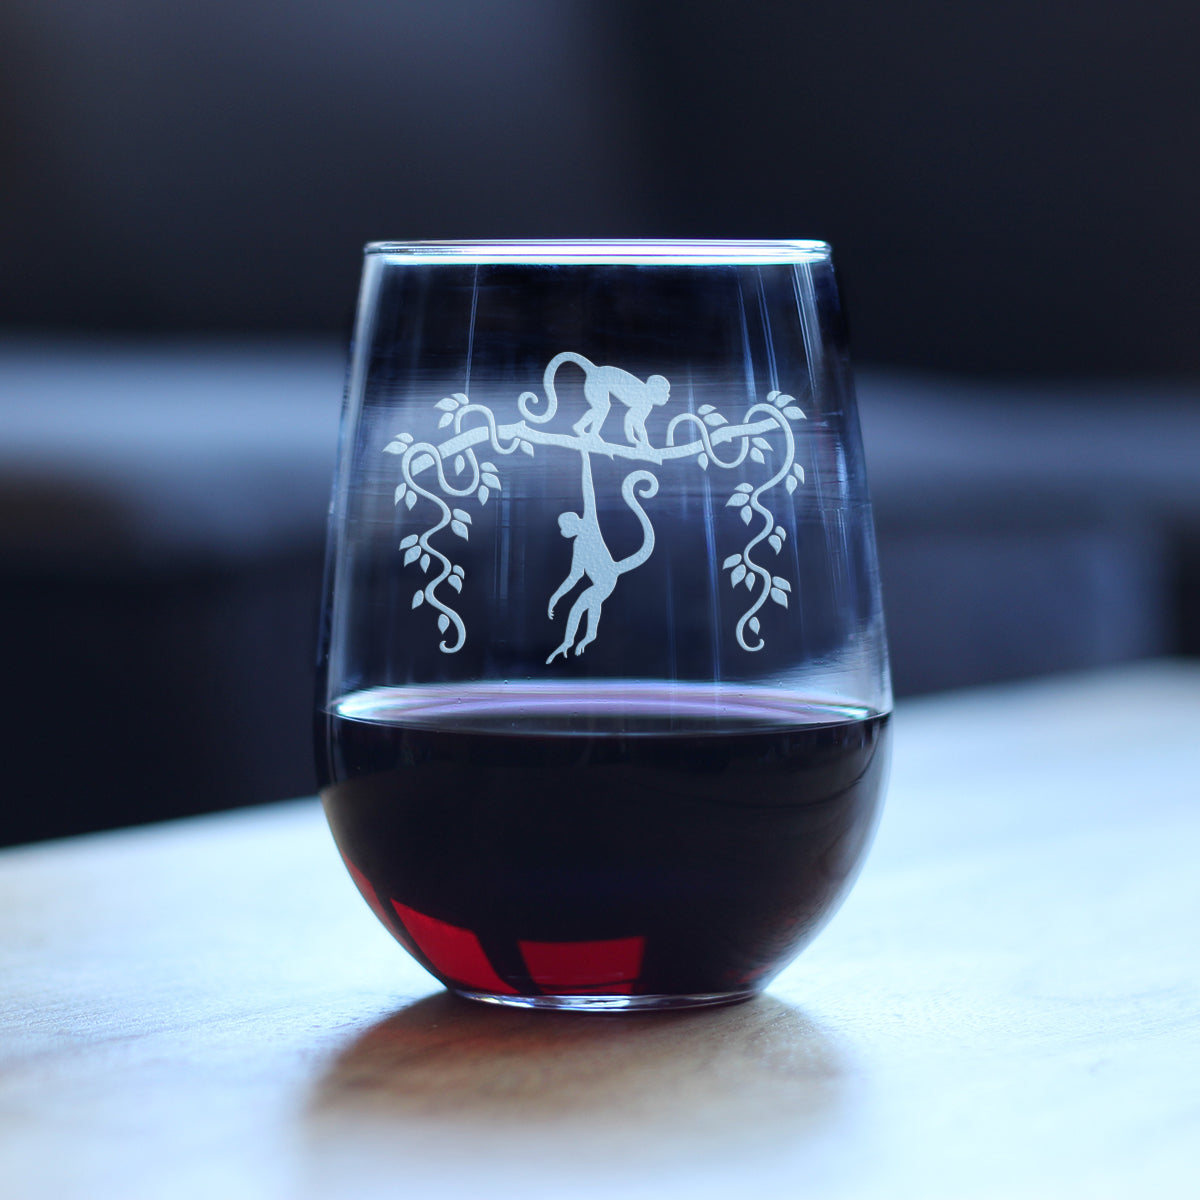 Monkey Stemless Wine Glass - Fun Wild Animal Themed Decor and Gifts for Lovers of Apes and Monkeys - Large 17 Oz Glasses